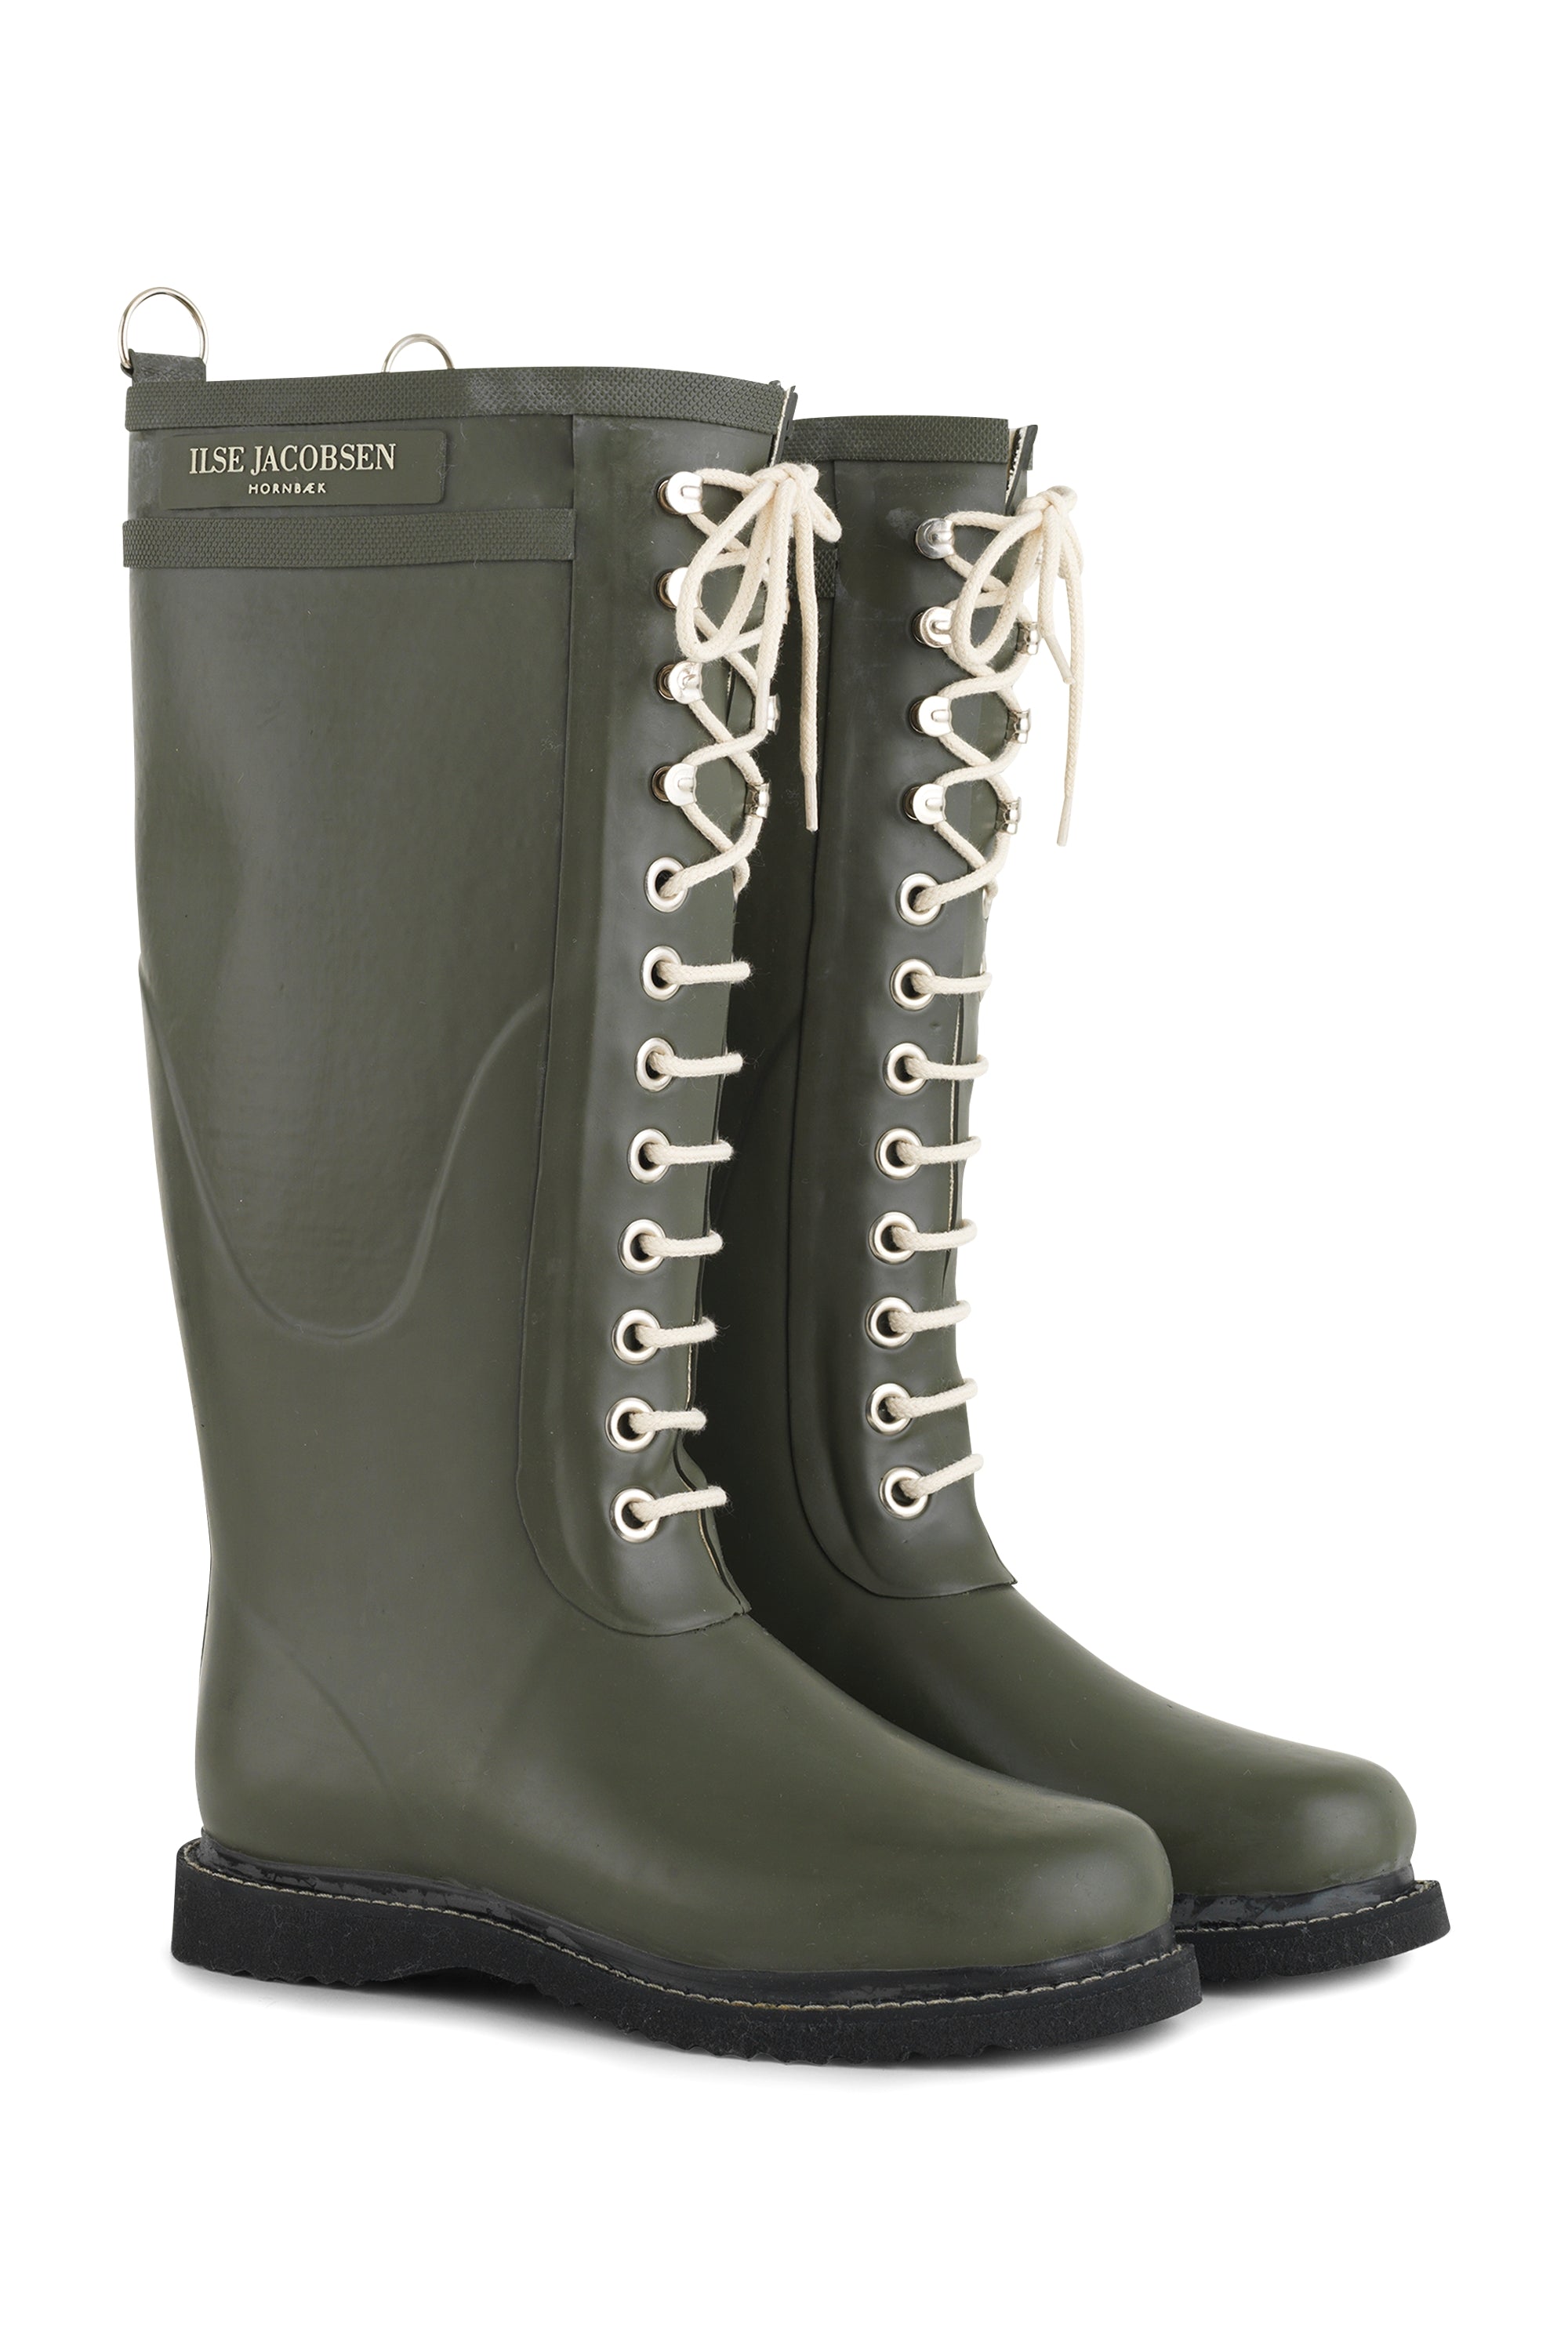 ILSE JACOBSEN TALL RUBBER BOOT | ARMY